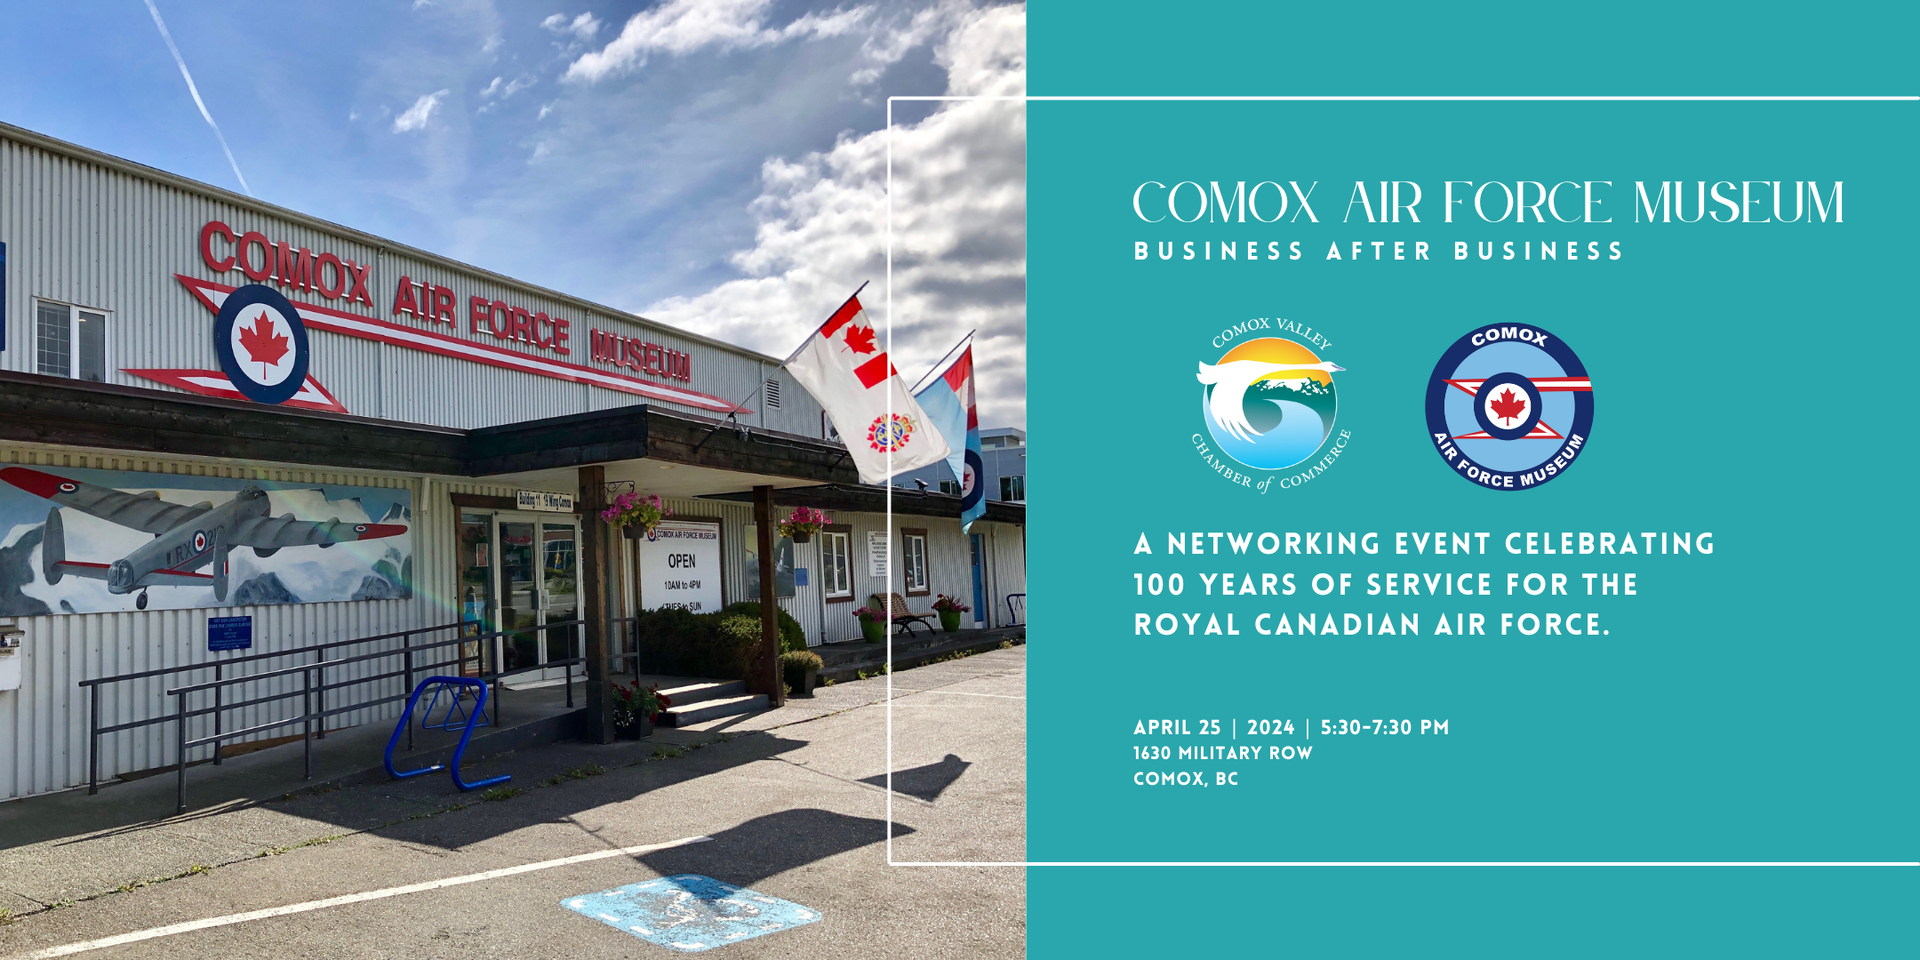 thumbnails Comox Air Force Museum Business After Business